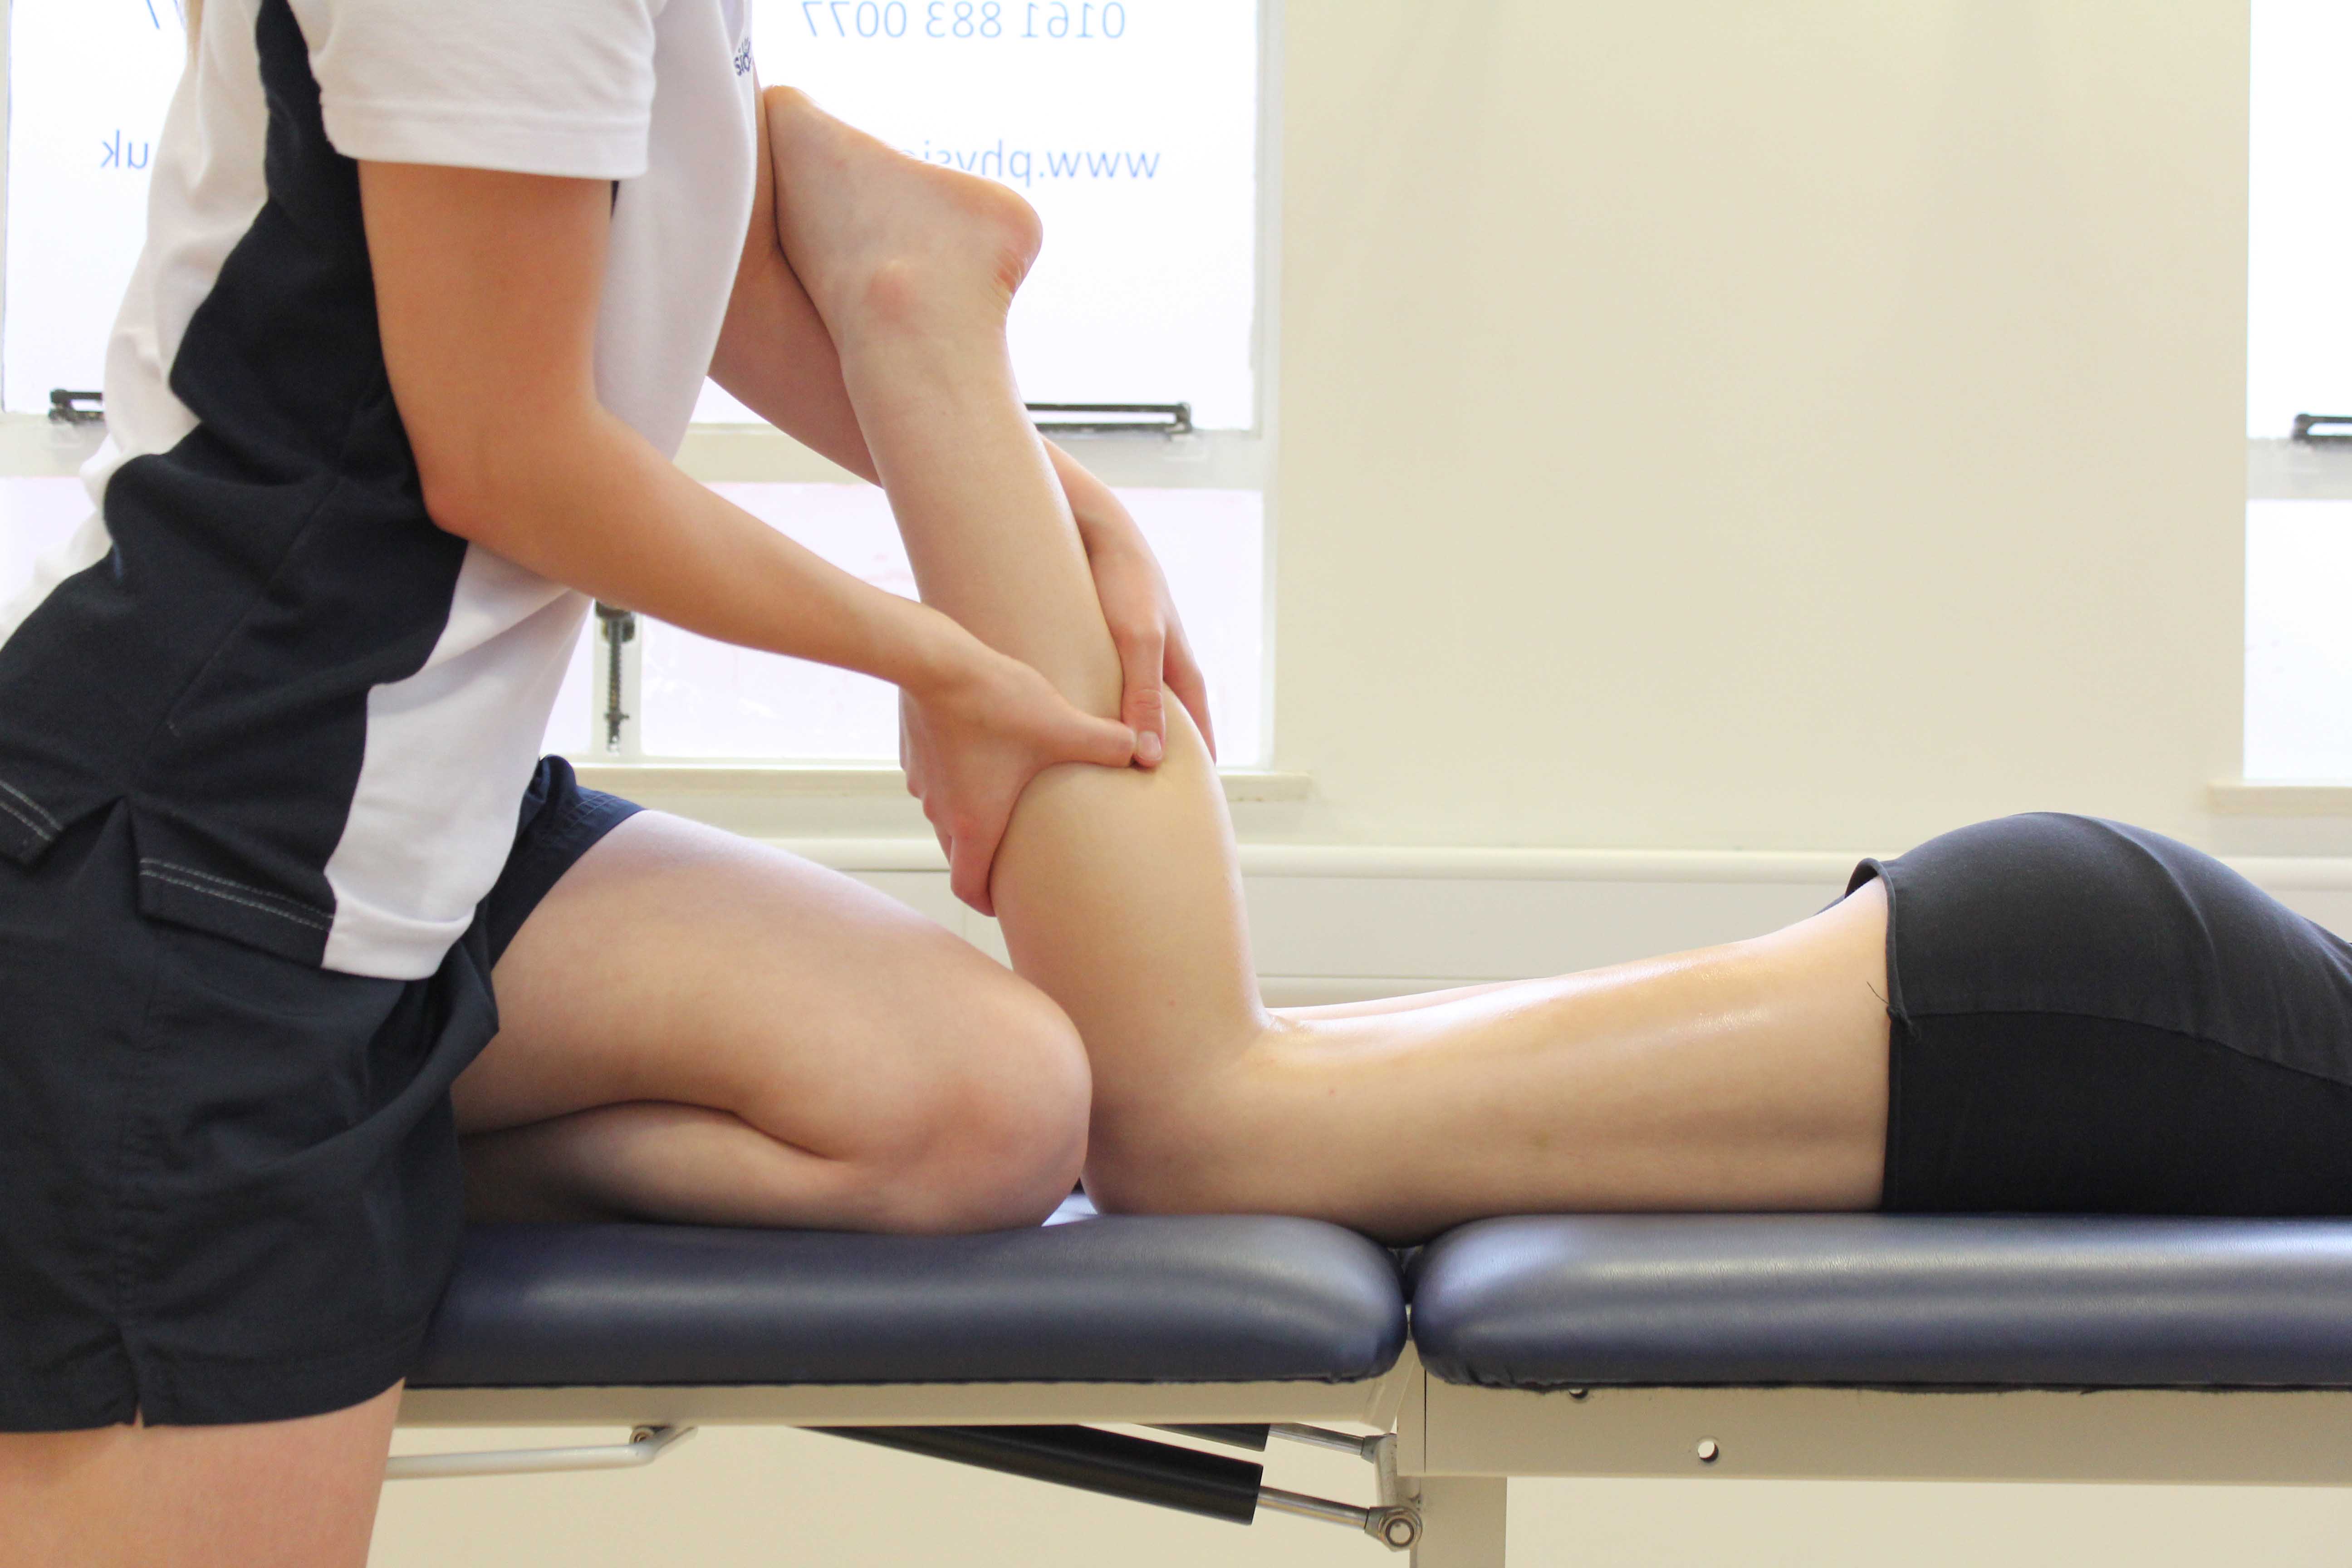 Trigger point massage applied to gastrocnemius muscle by specilaist therapist